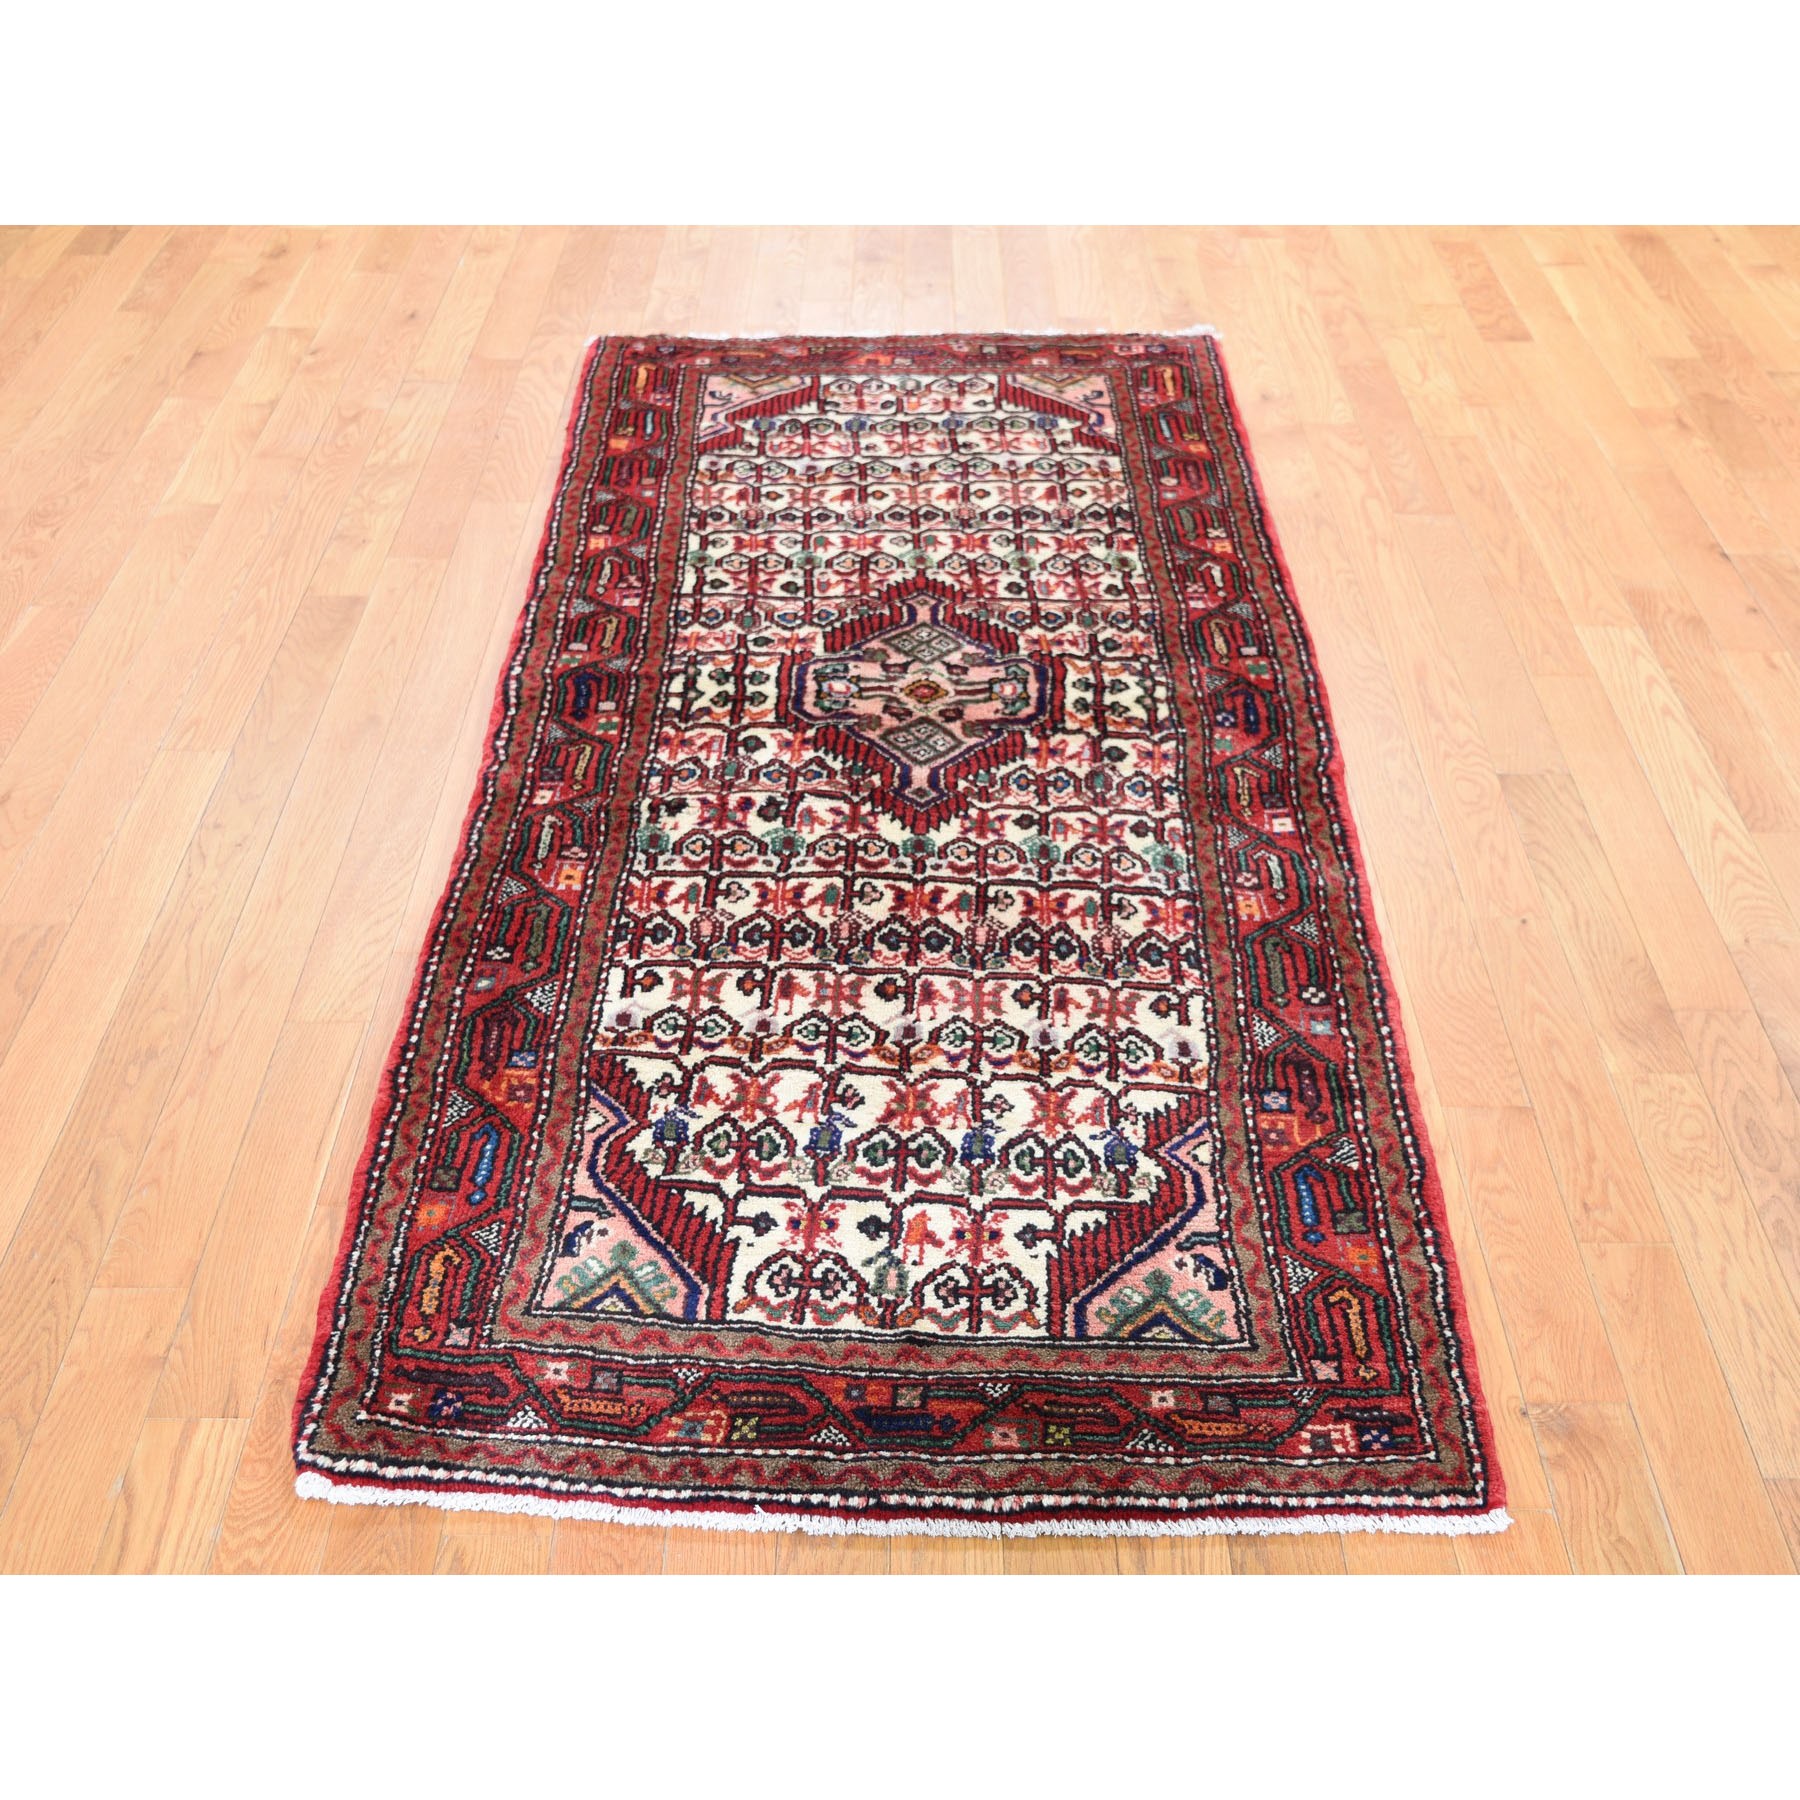 3-1 x7-1  Red New Persian Hamadan Pure Wool Runner Hand Knotted Oriental Rug 